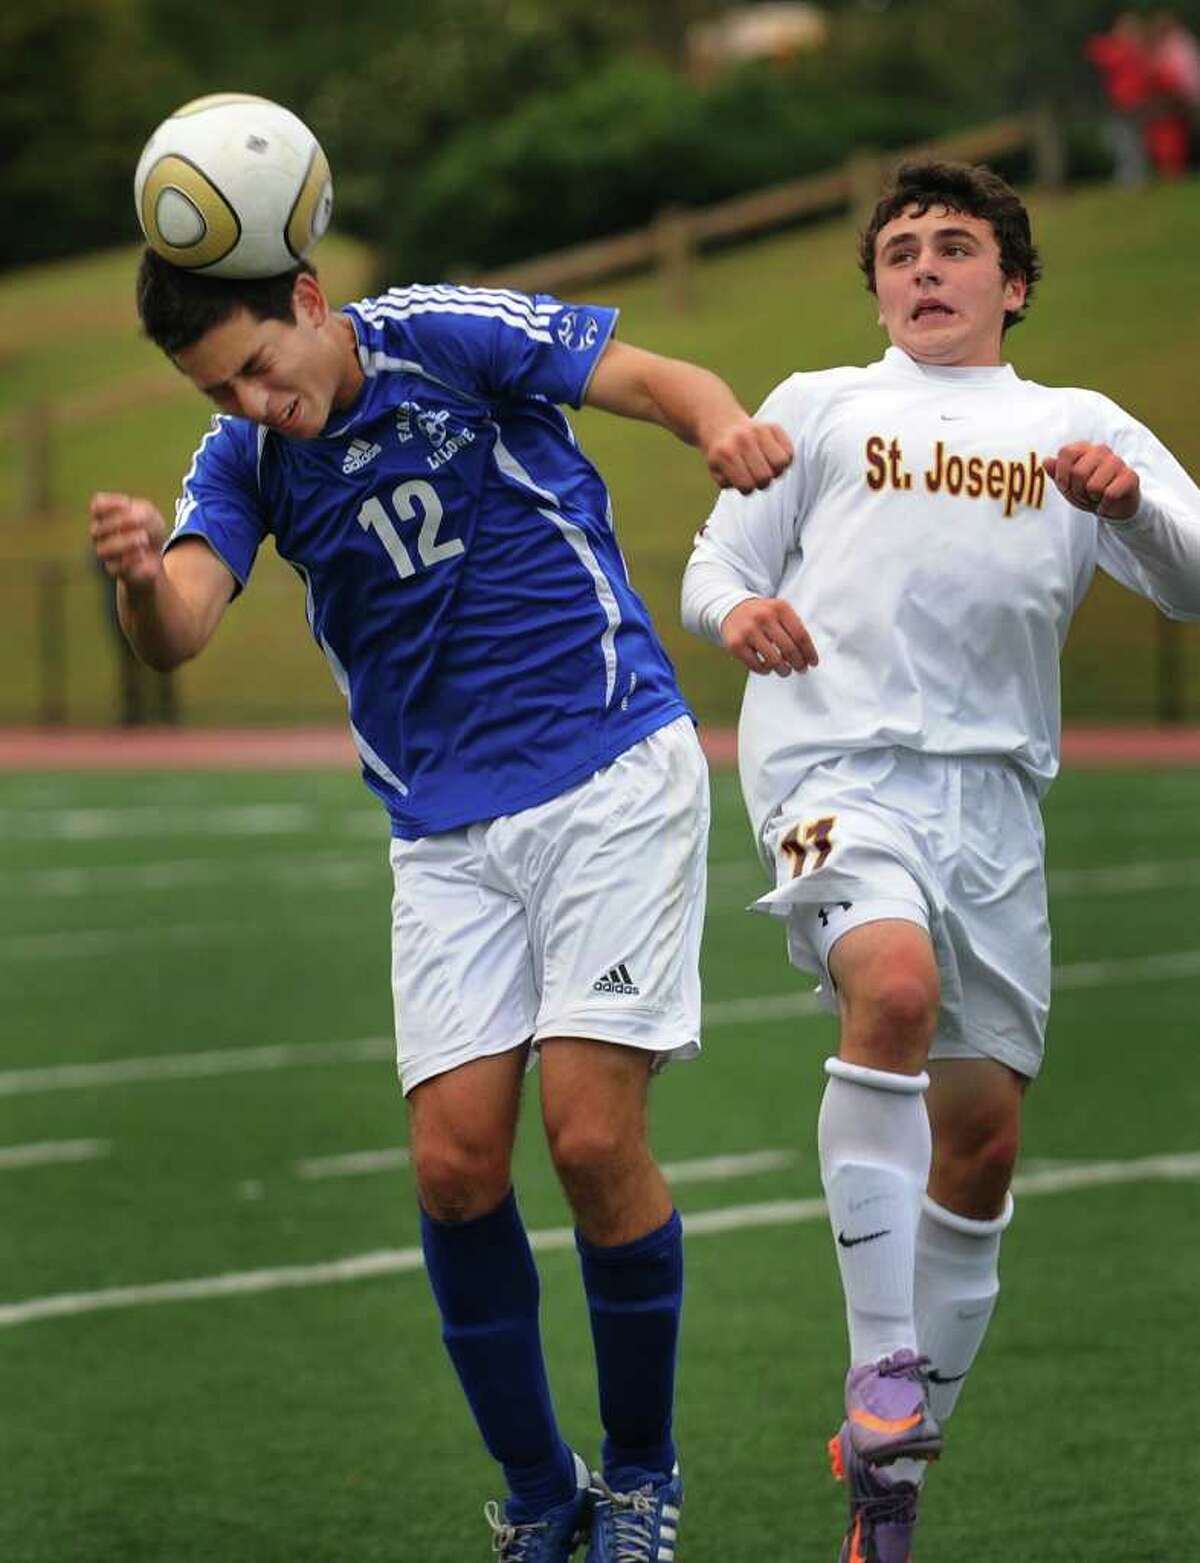 Fairfield Ludlowe's Ian Wolff heads the ball in front of St. Joseph's Zac Psaras during their teams' 0-0 tie at St. Joseph High School in Trumbull on Monday, October 4, 2010.